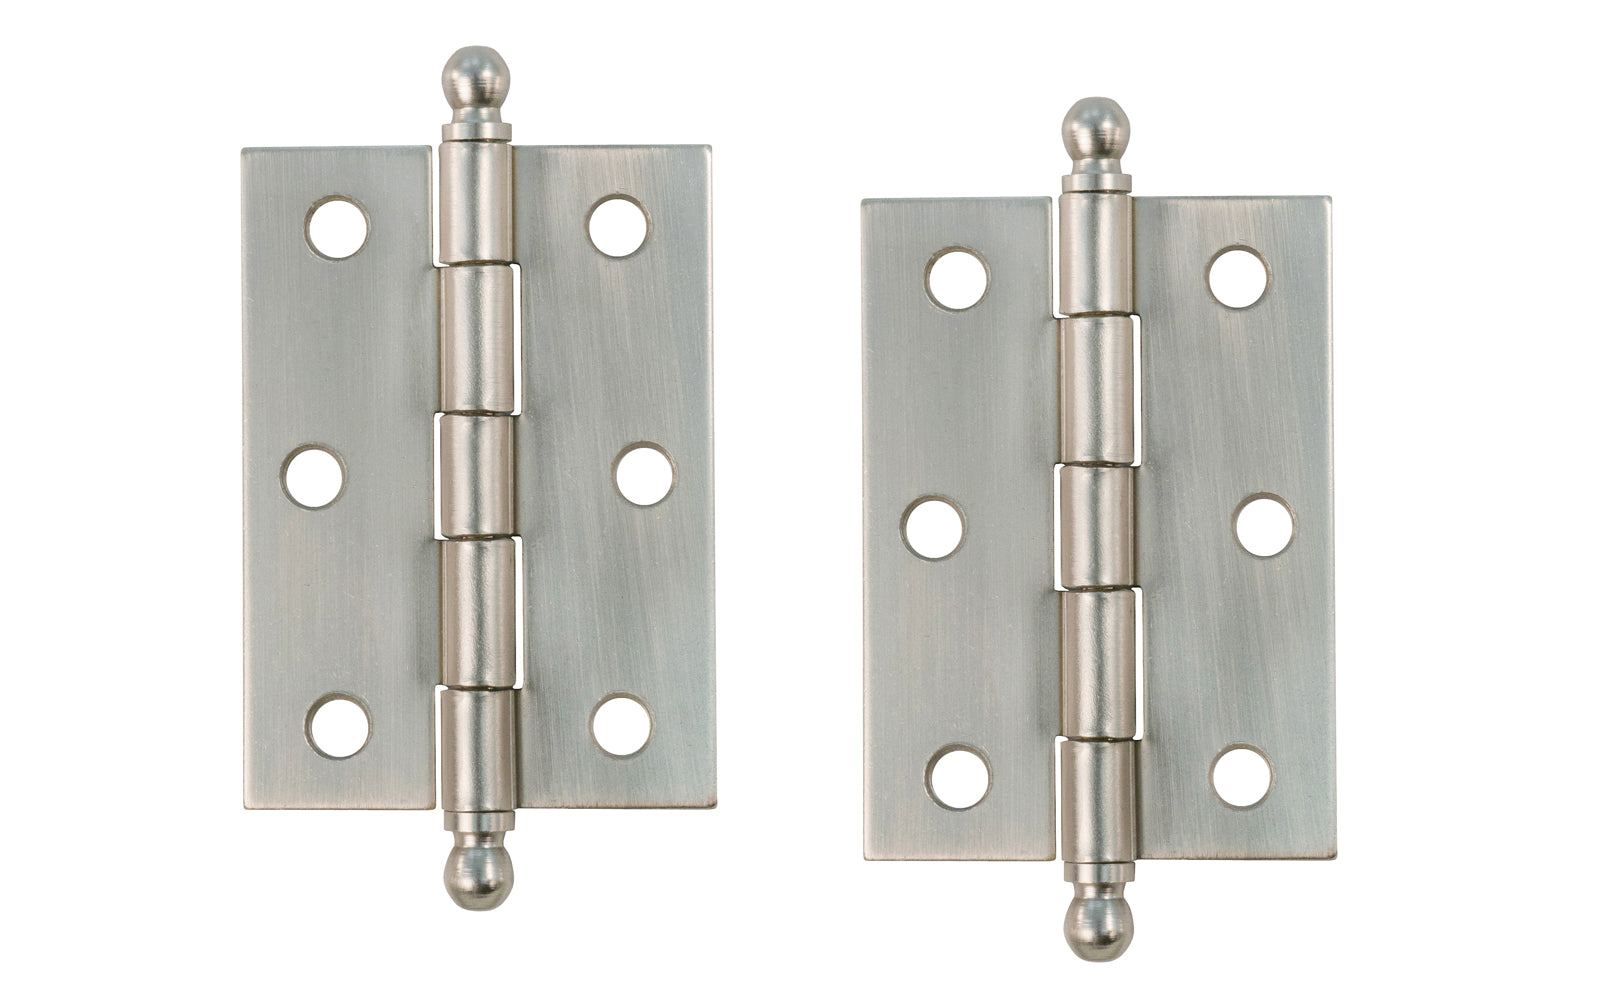 Traditional & classic ball-tip steel cabinet hinges with loose pins. Removable hinge pins which makes for easy installation when working with cabinets. 2-7/16" high x 1-3/4" wide. Sold as a pair. Brushed Nickel Finish.